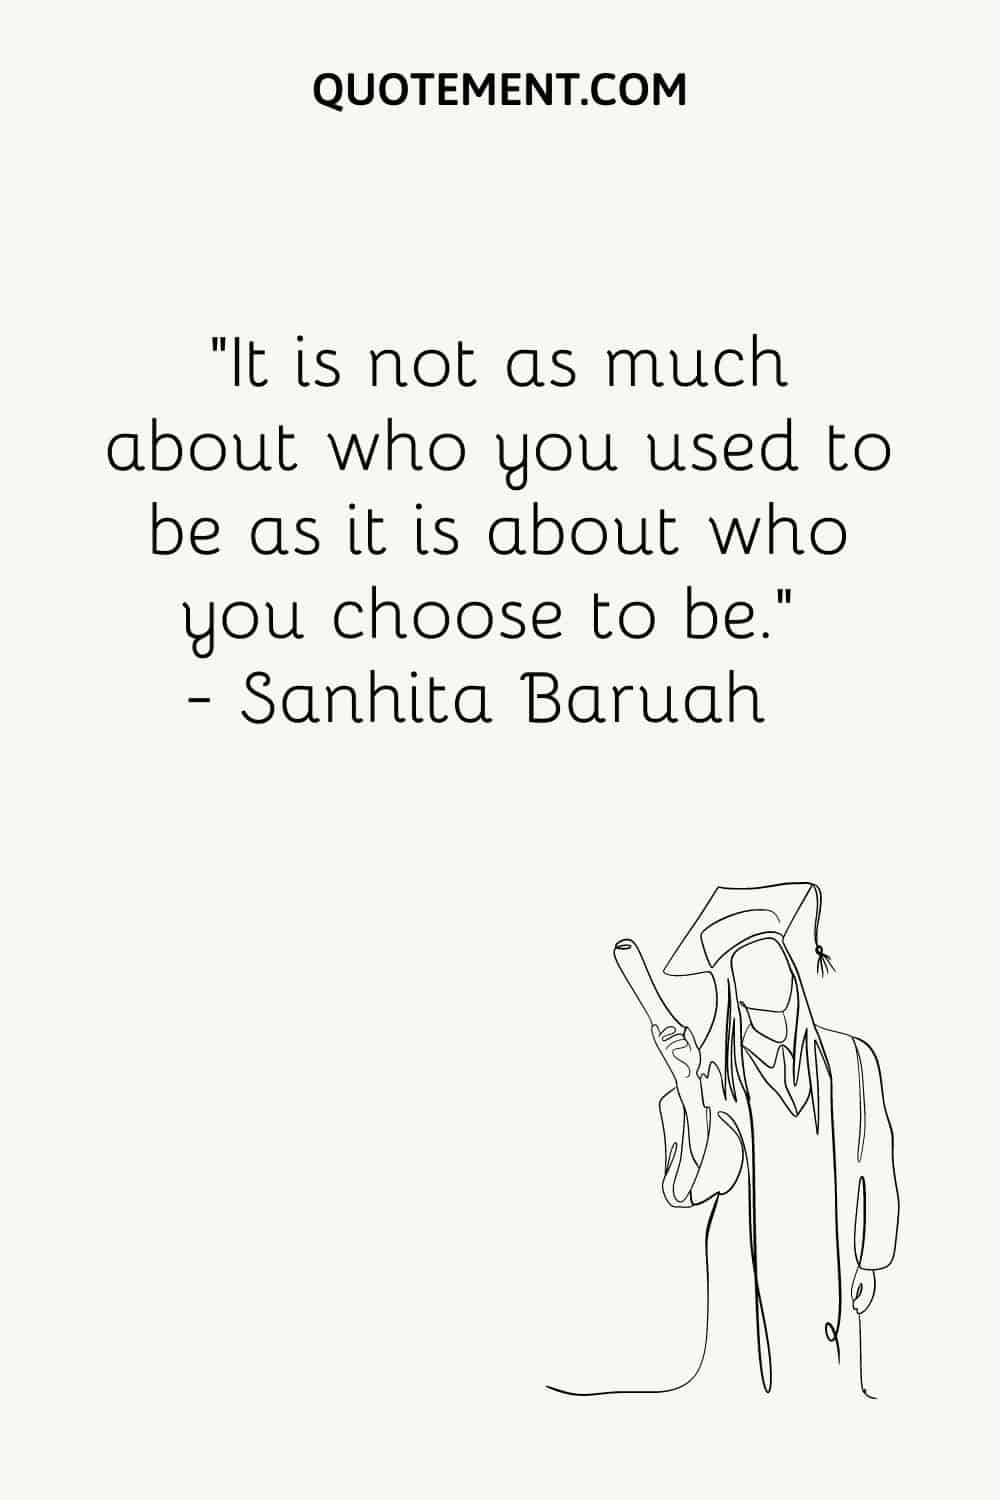 It is not as much about who you used to be as it is about who you choose to be